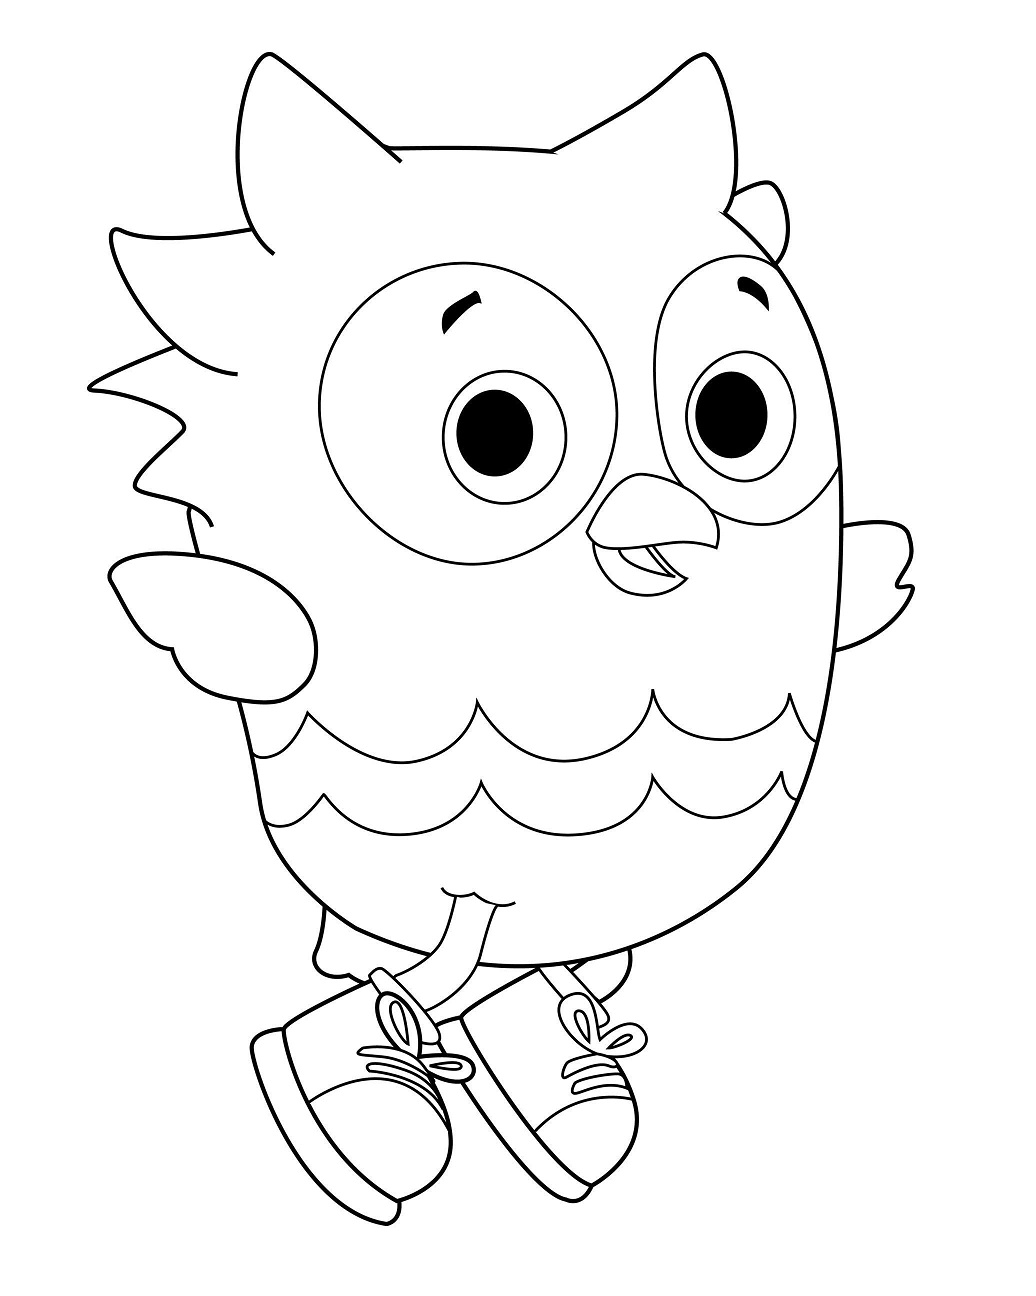 Daniel Tiger Coloring Pages - Free Printable Coloring Pages for Kids